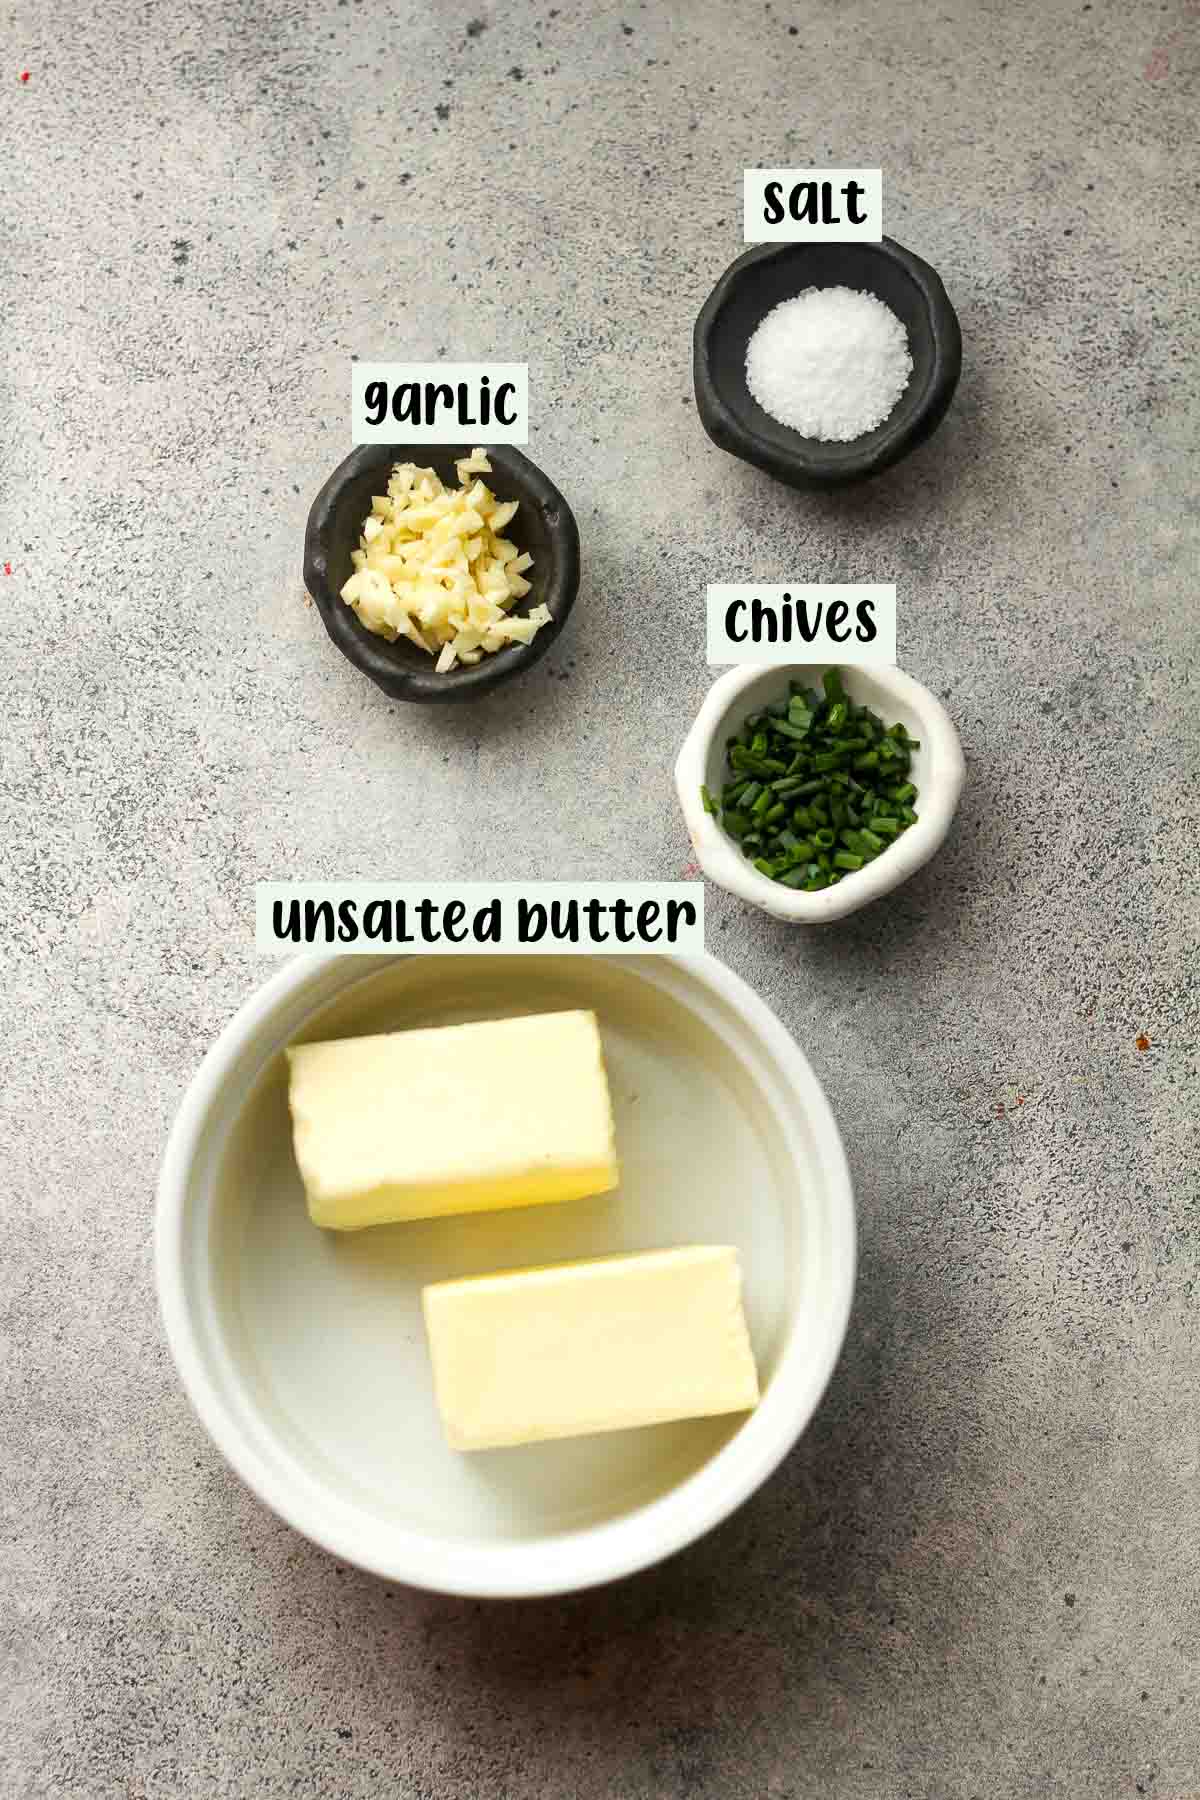 The garlic butter with chives ingredients.